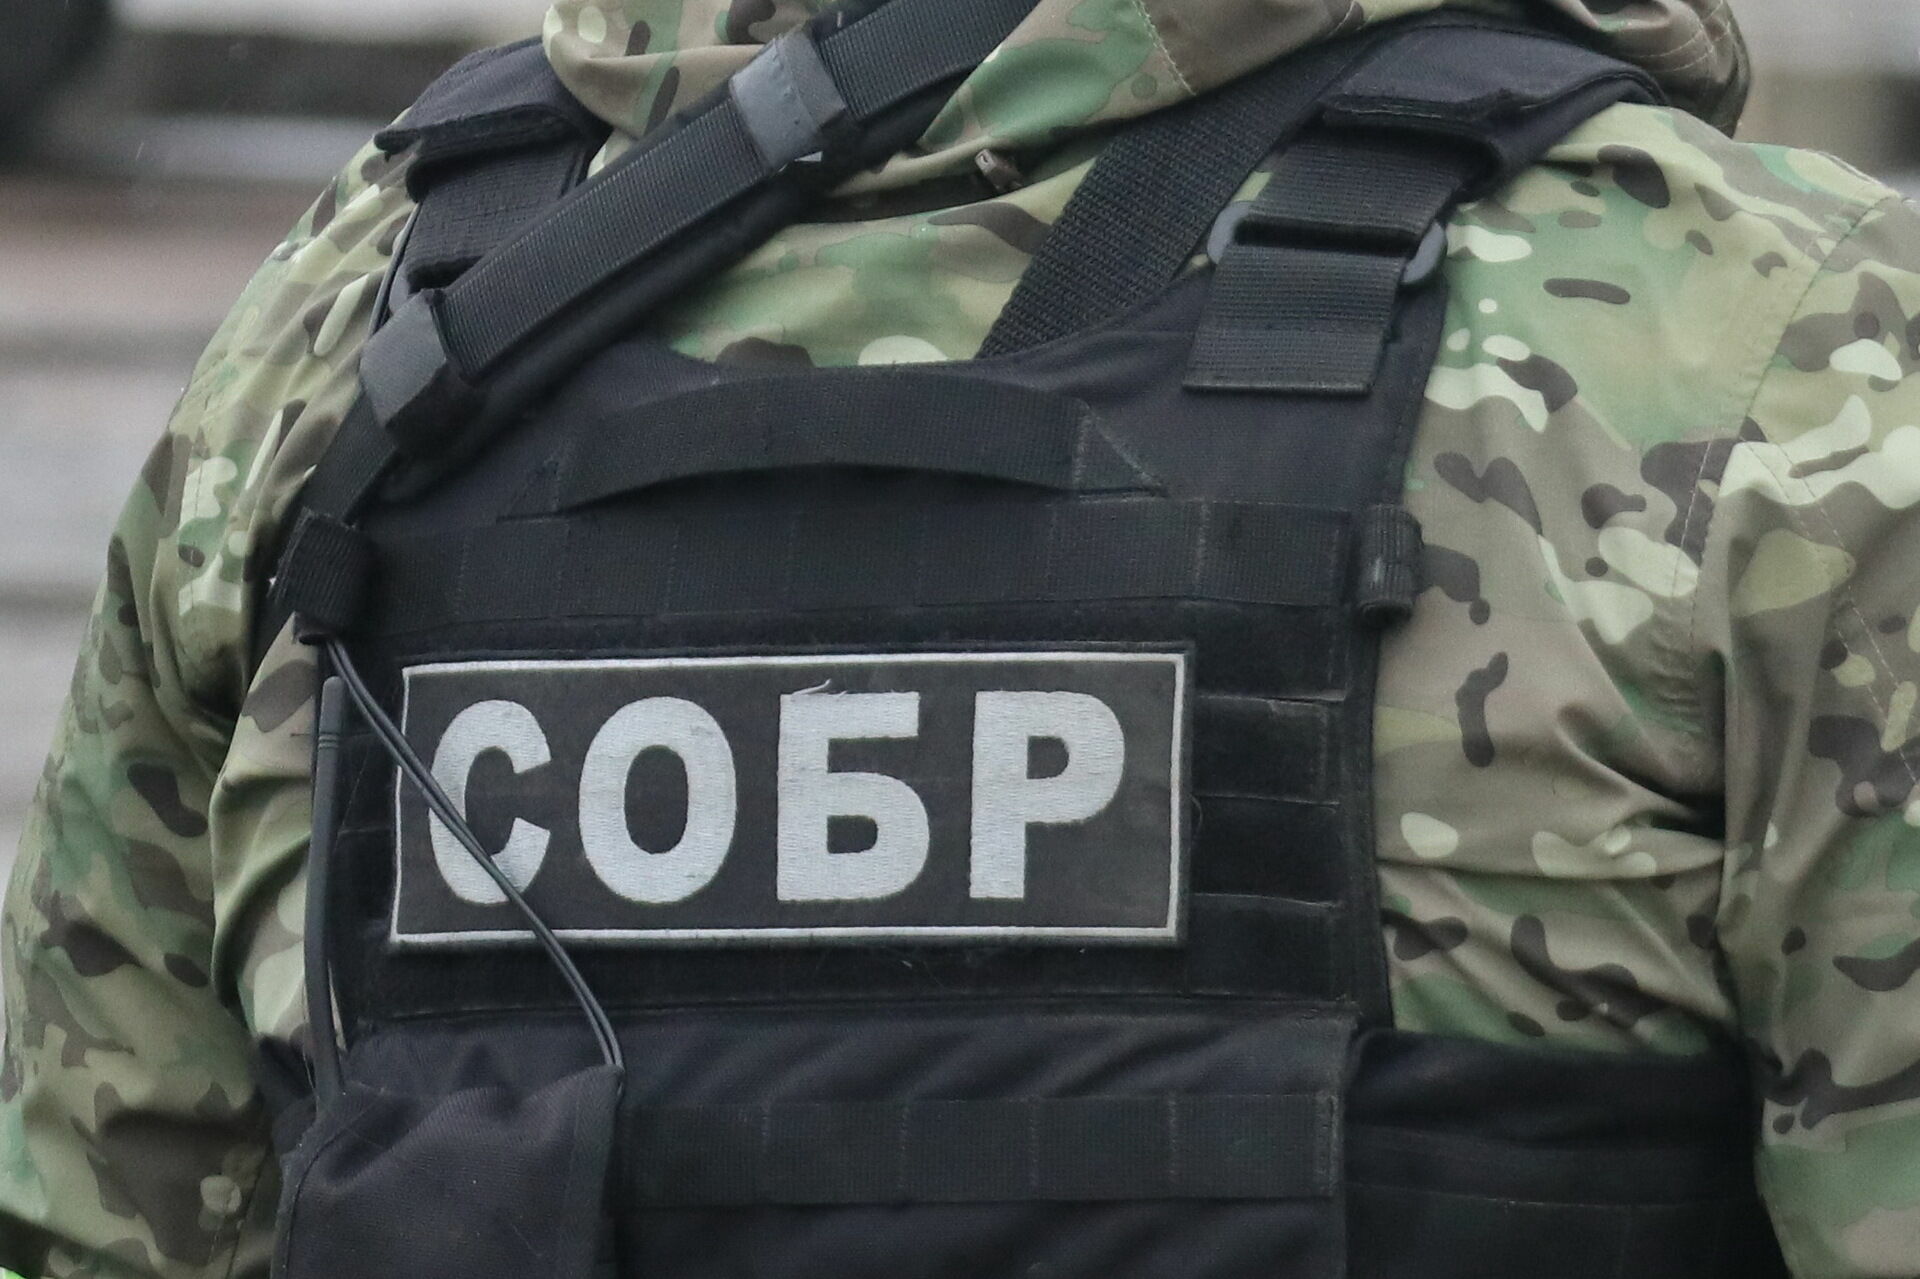 In St. Petersburg, SOBR Special rapid response squad officer died while arresting telephone scammers